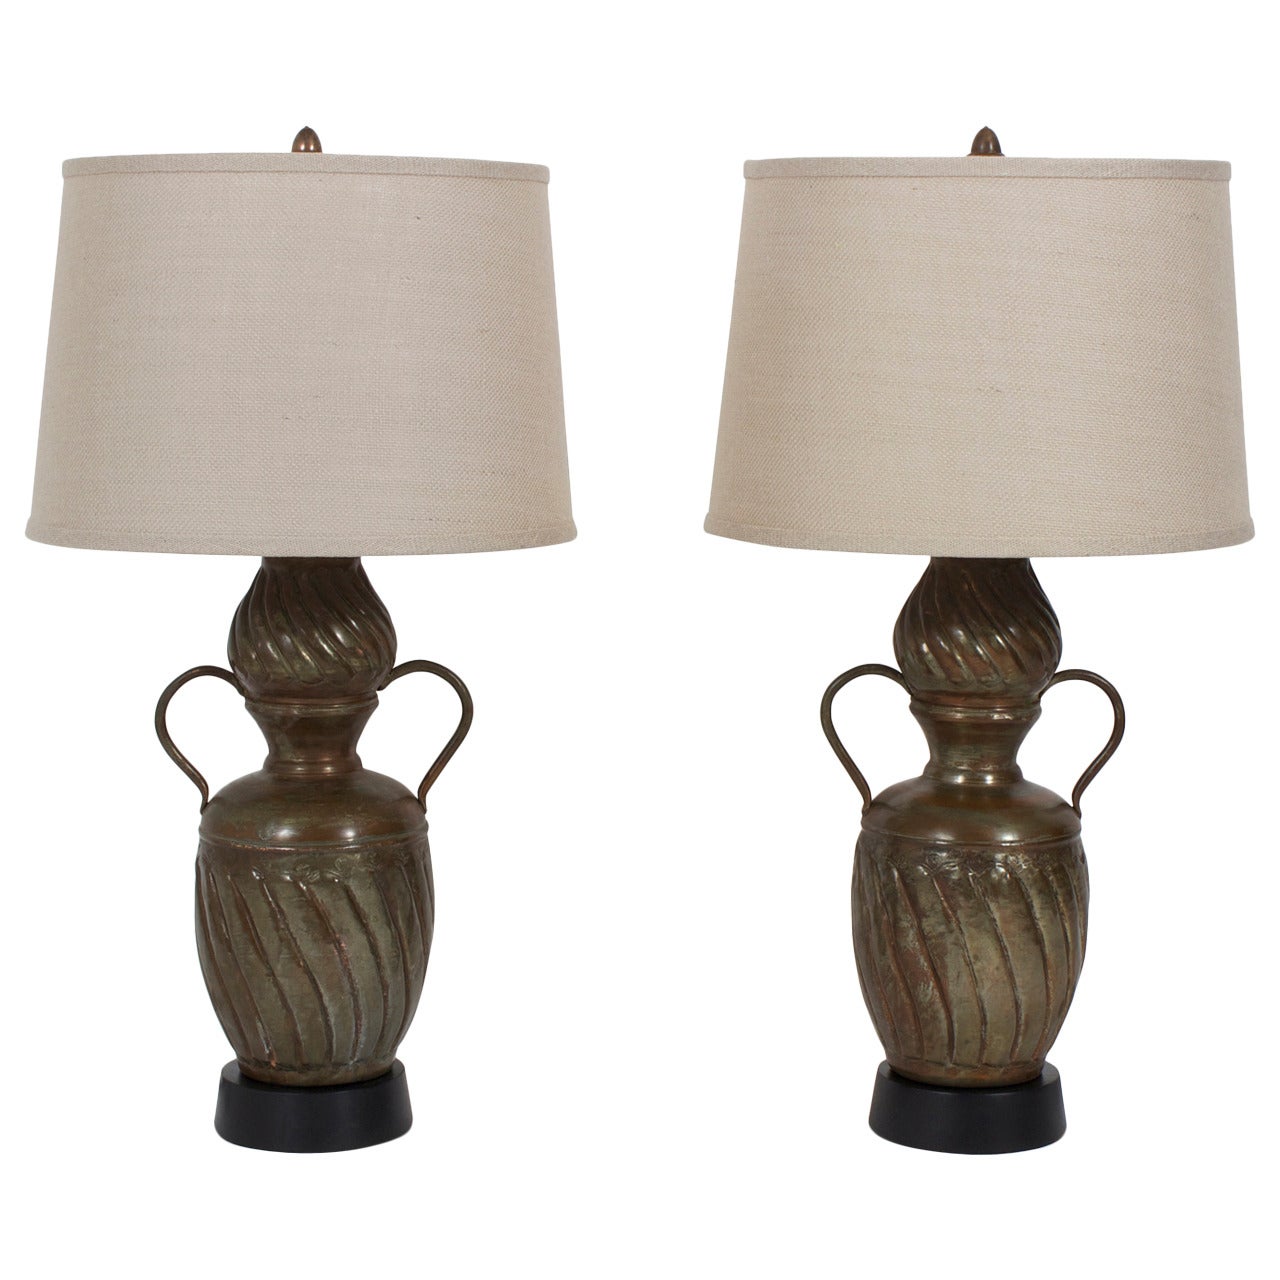 Pair of Custom Made Copper Table Lamps